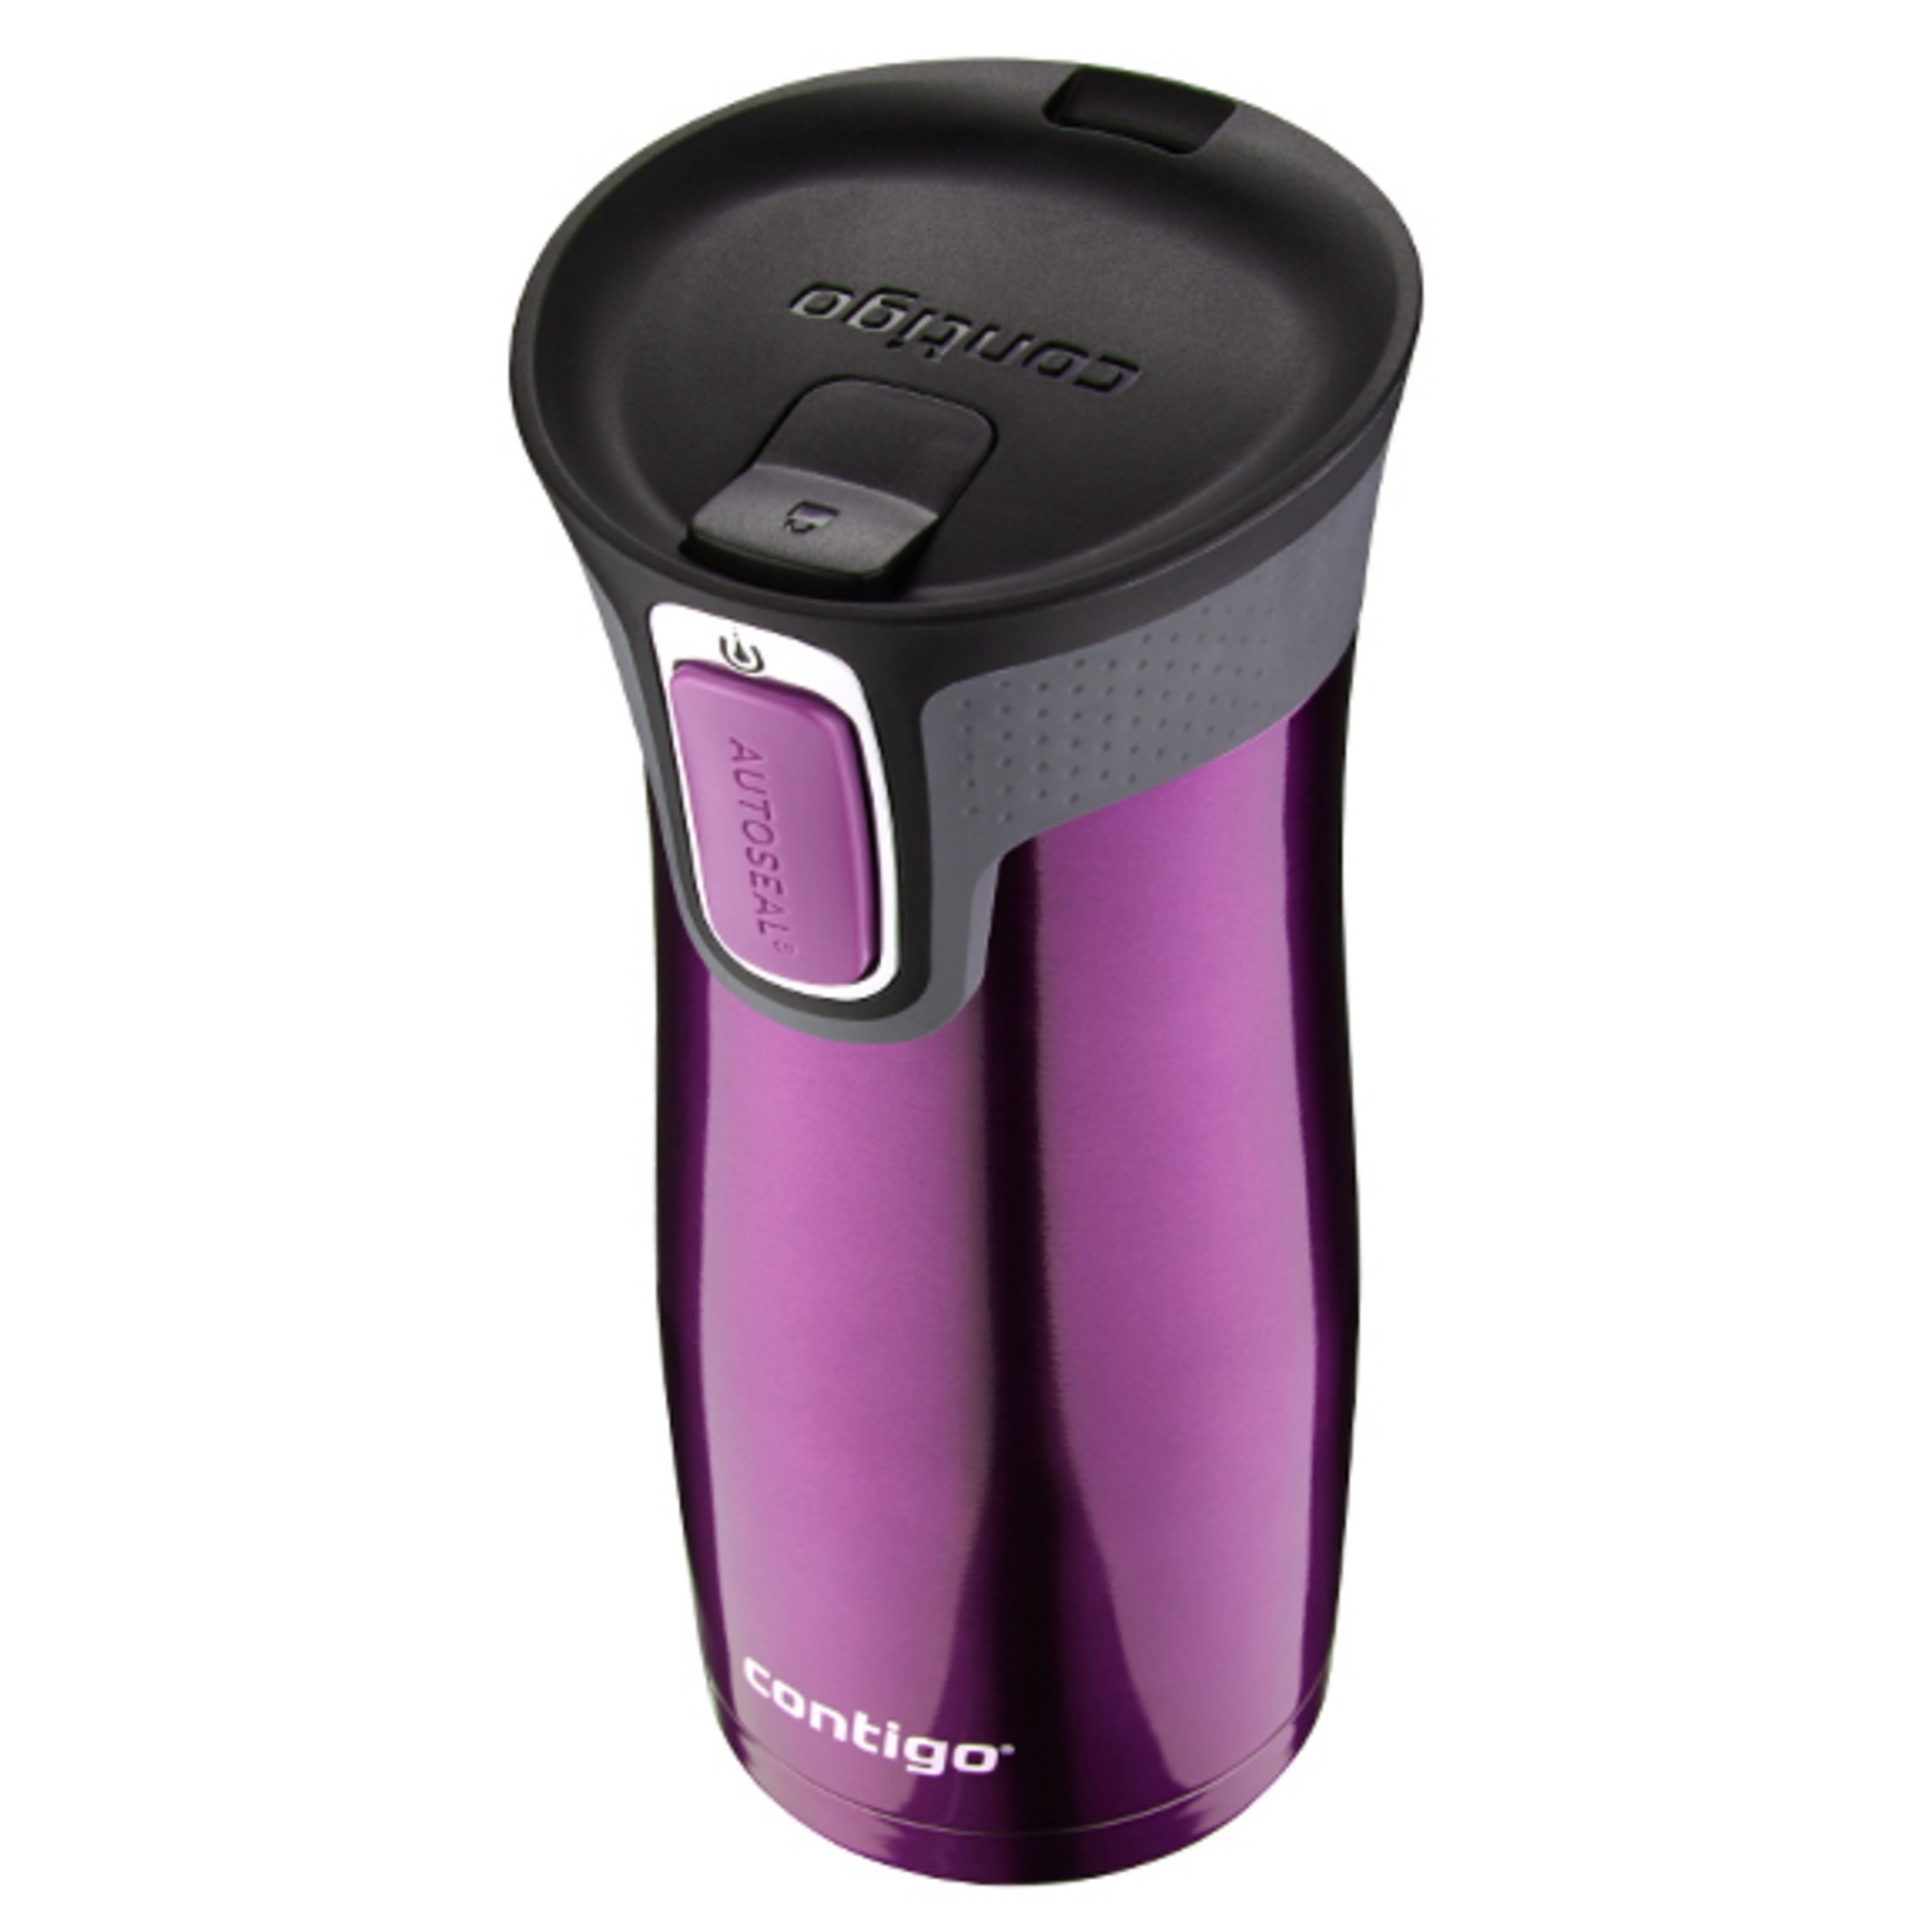 Contigo West Loop Stainless Steel Travel Mug with AUTOSEAL Lid Radiant Orchid, 16 fl oz. - image 3 of 4